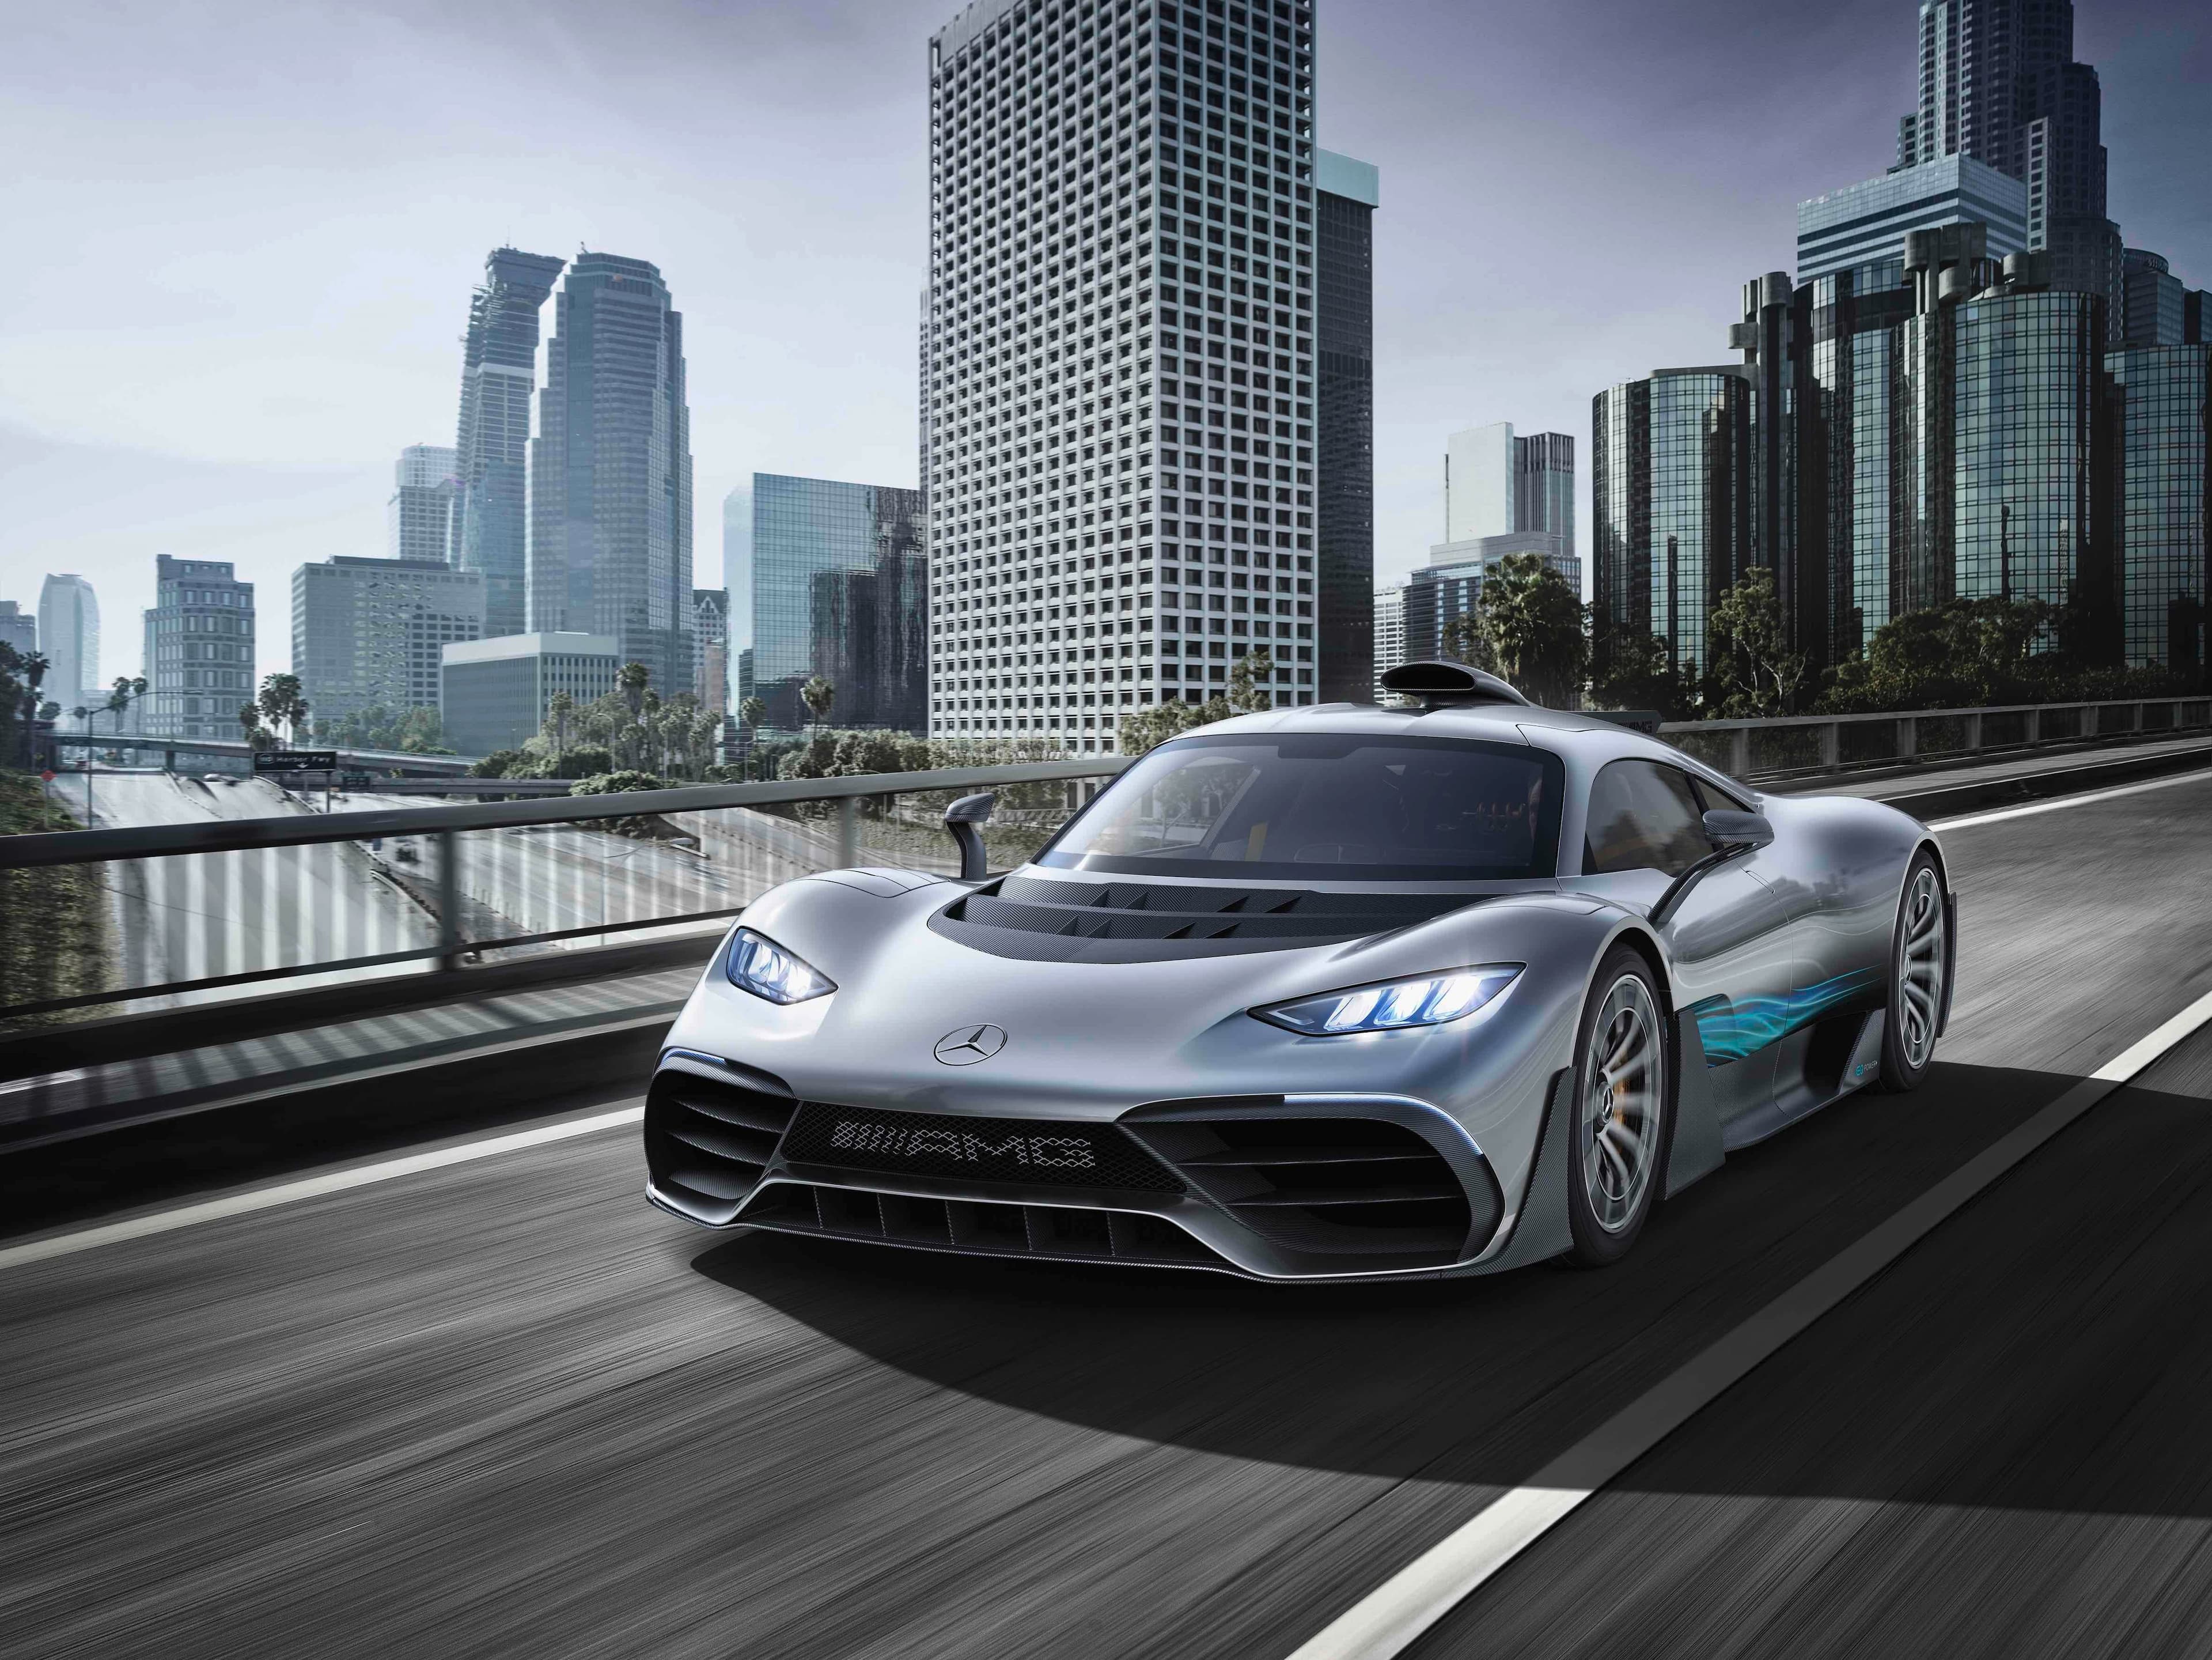 1000-Horsepower Mercedes-AMG Project ONE Hypercar Unveiled